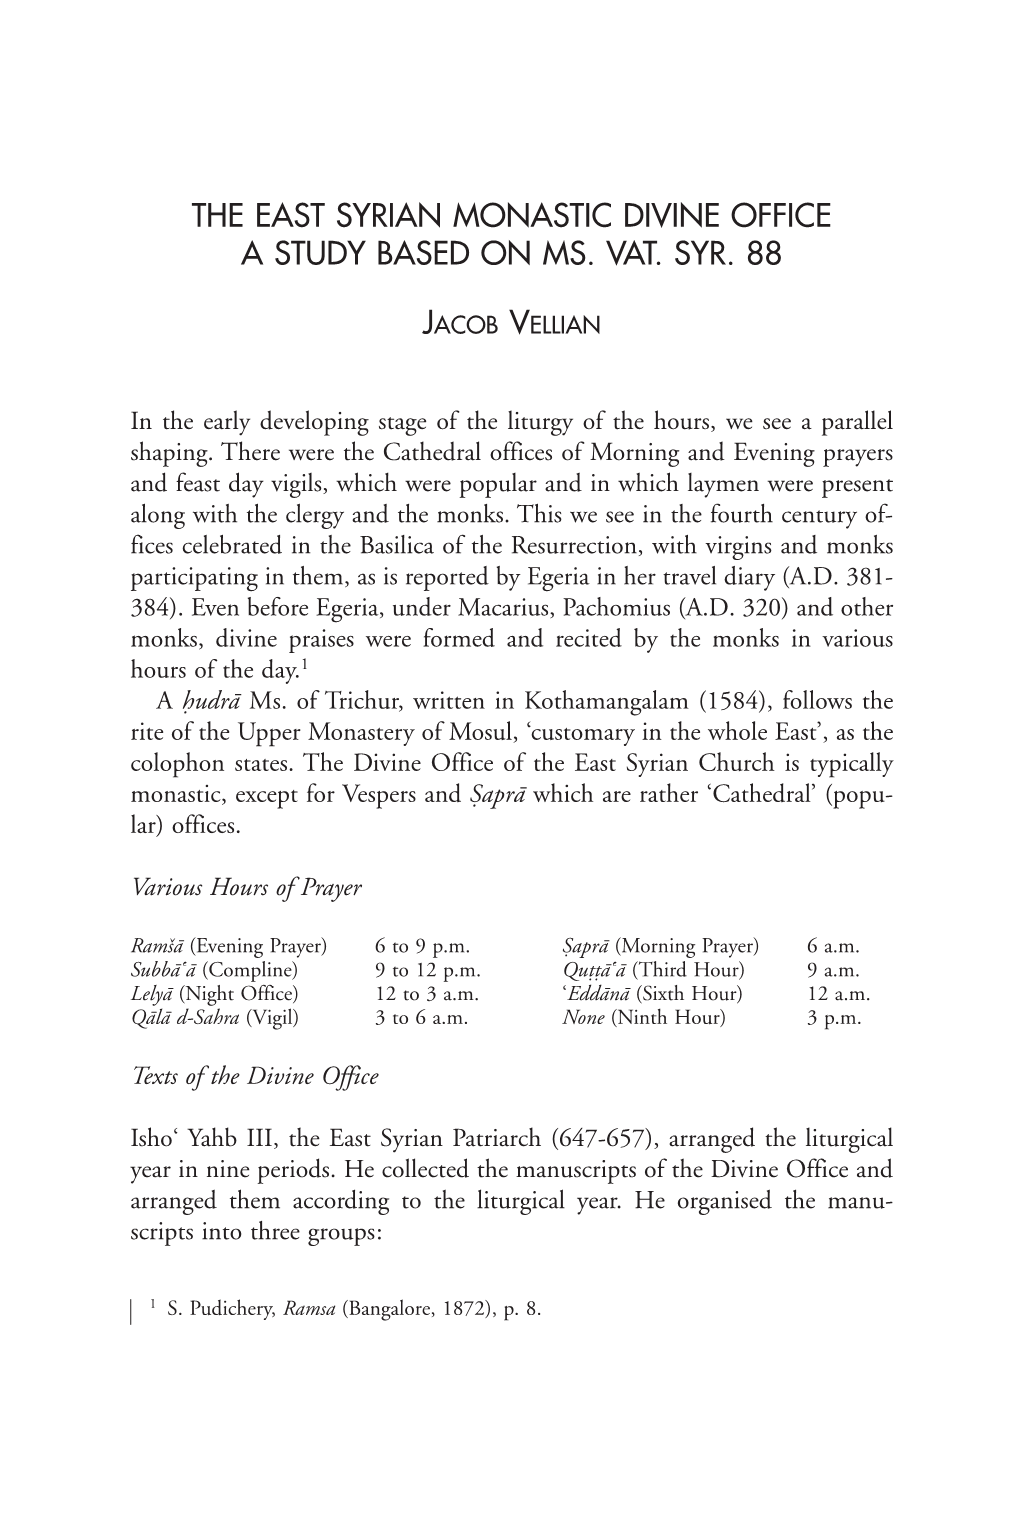 The East Syrian Monastic Divine Office a Study Based on Ms